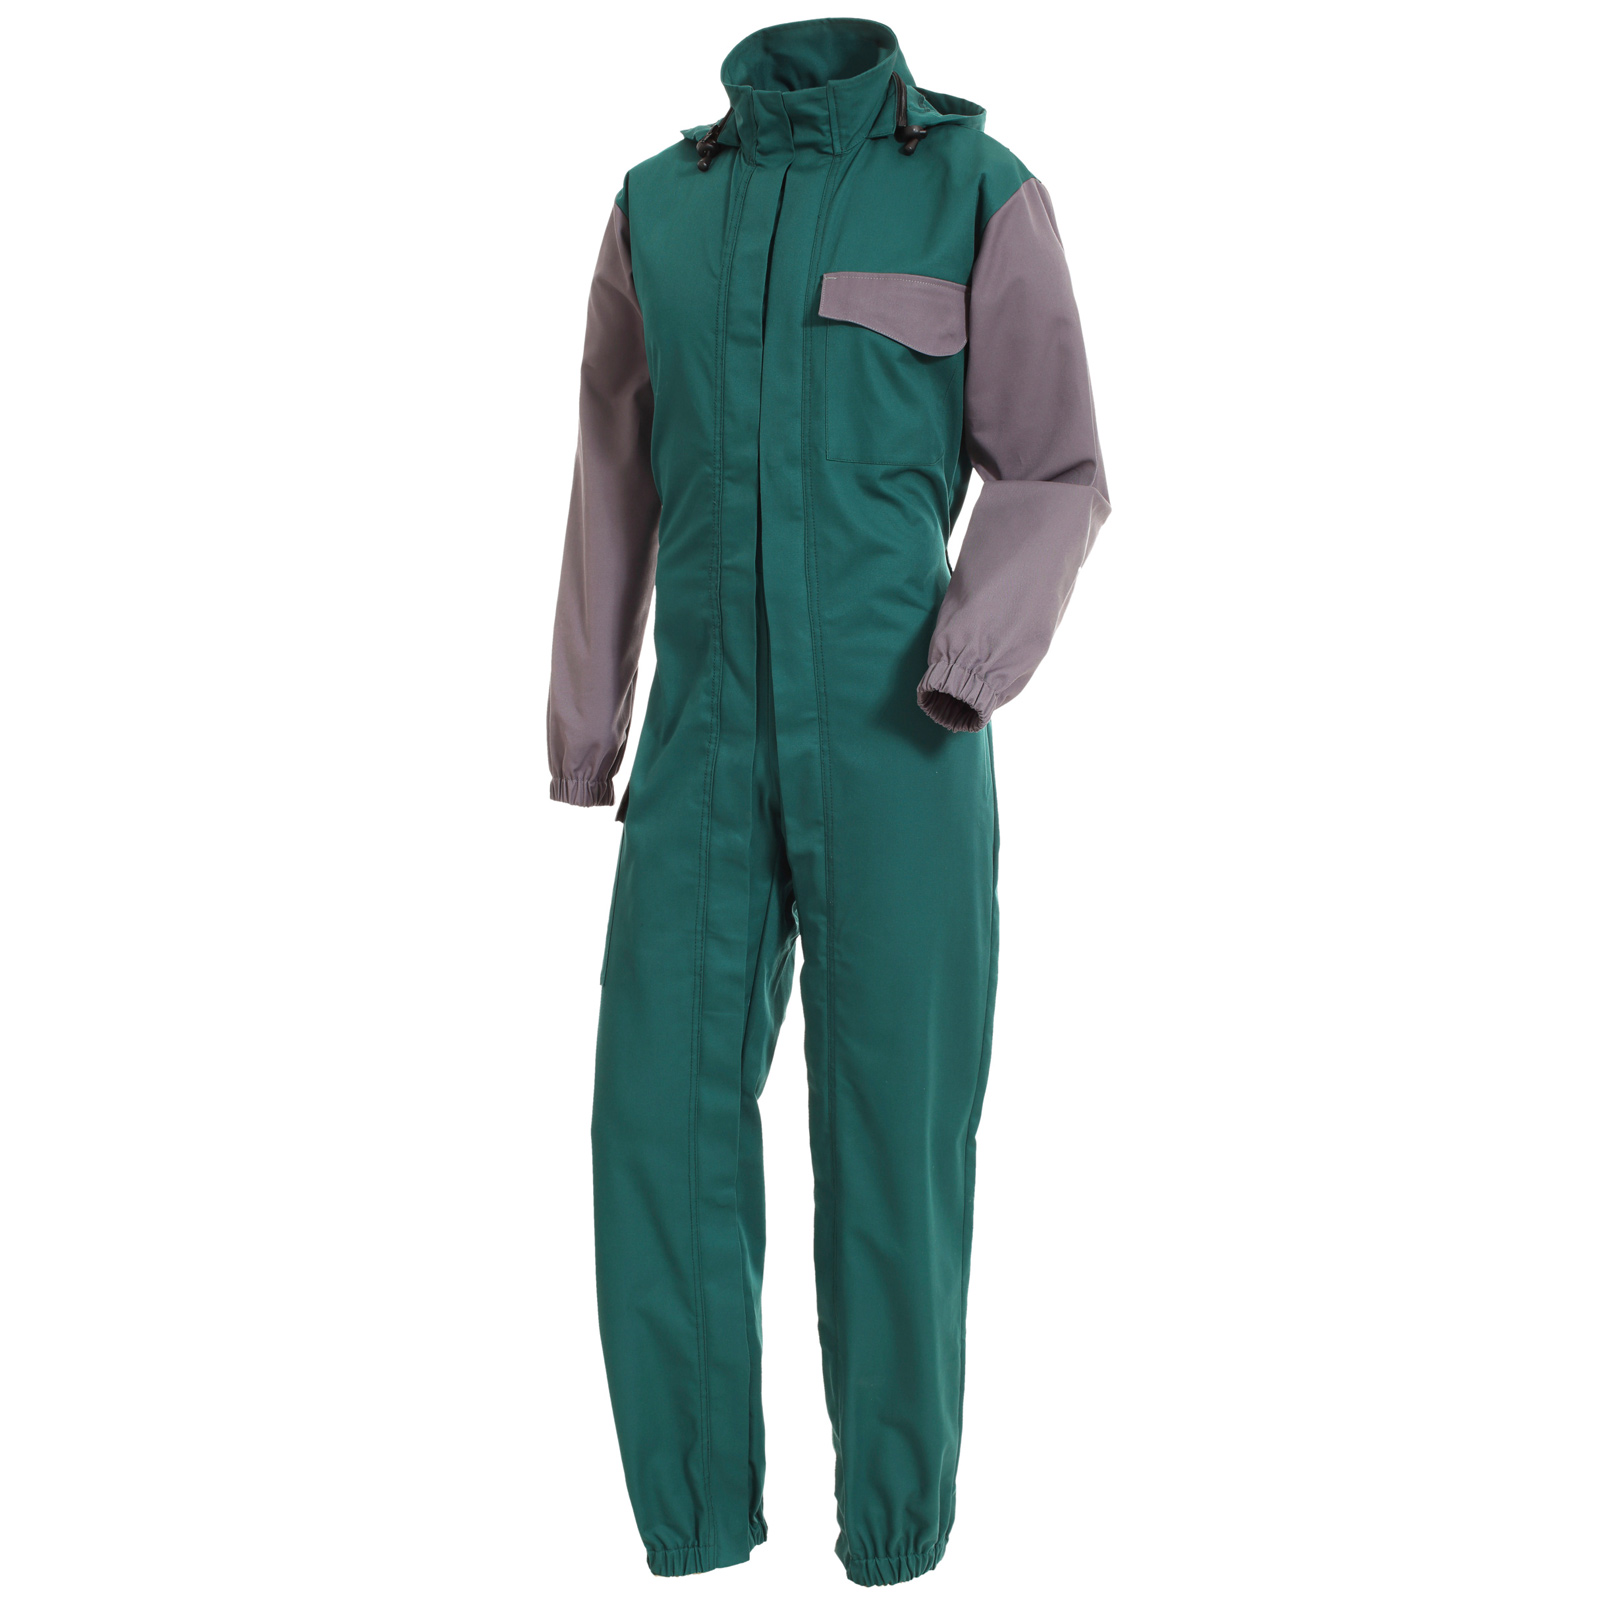 Plant protection overall Aegis green-grey